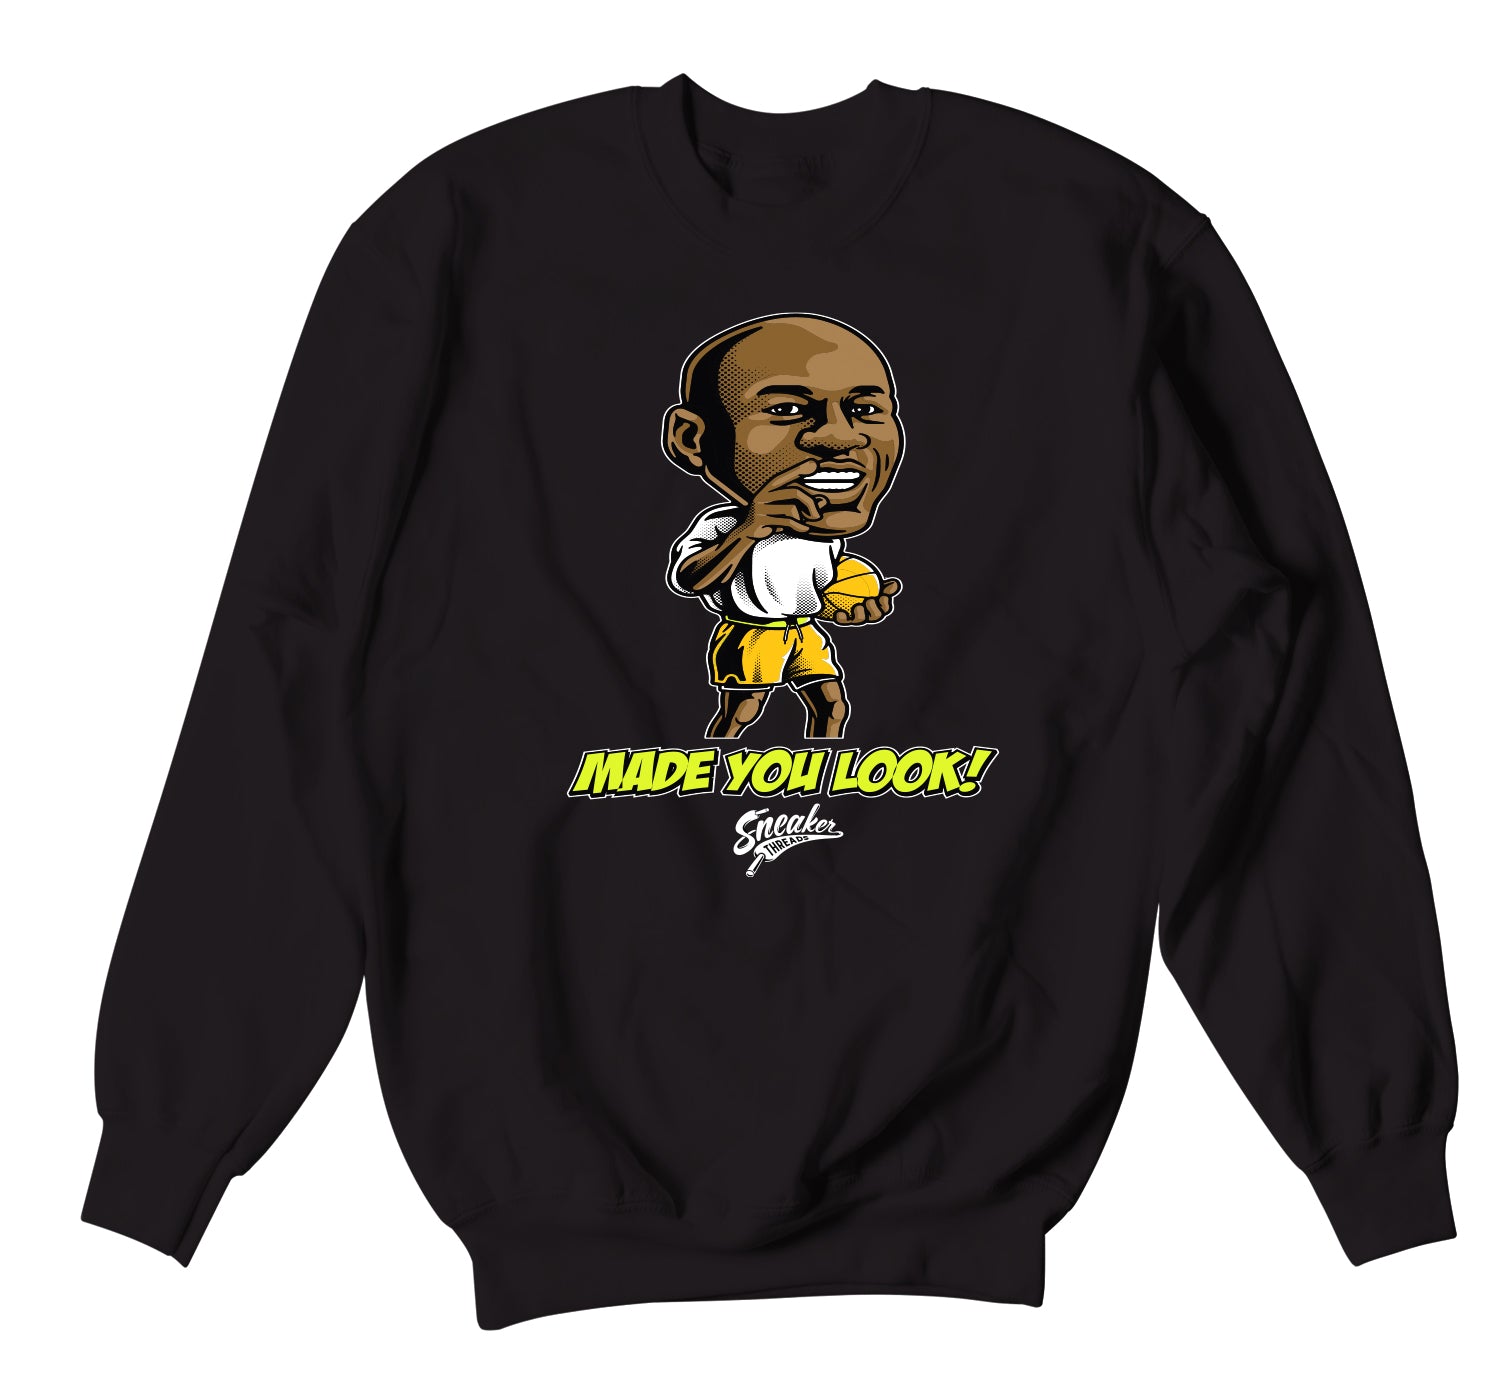 Retro 1 Volt Gold Sweater - Made You Look - Black